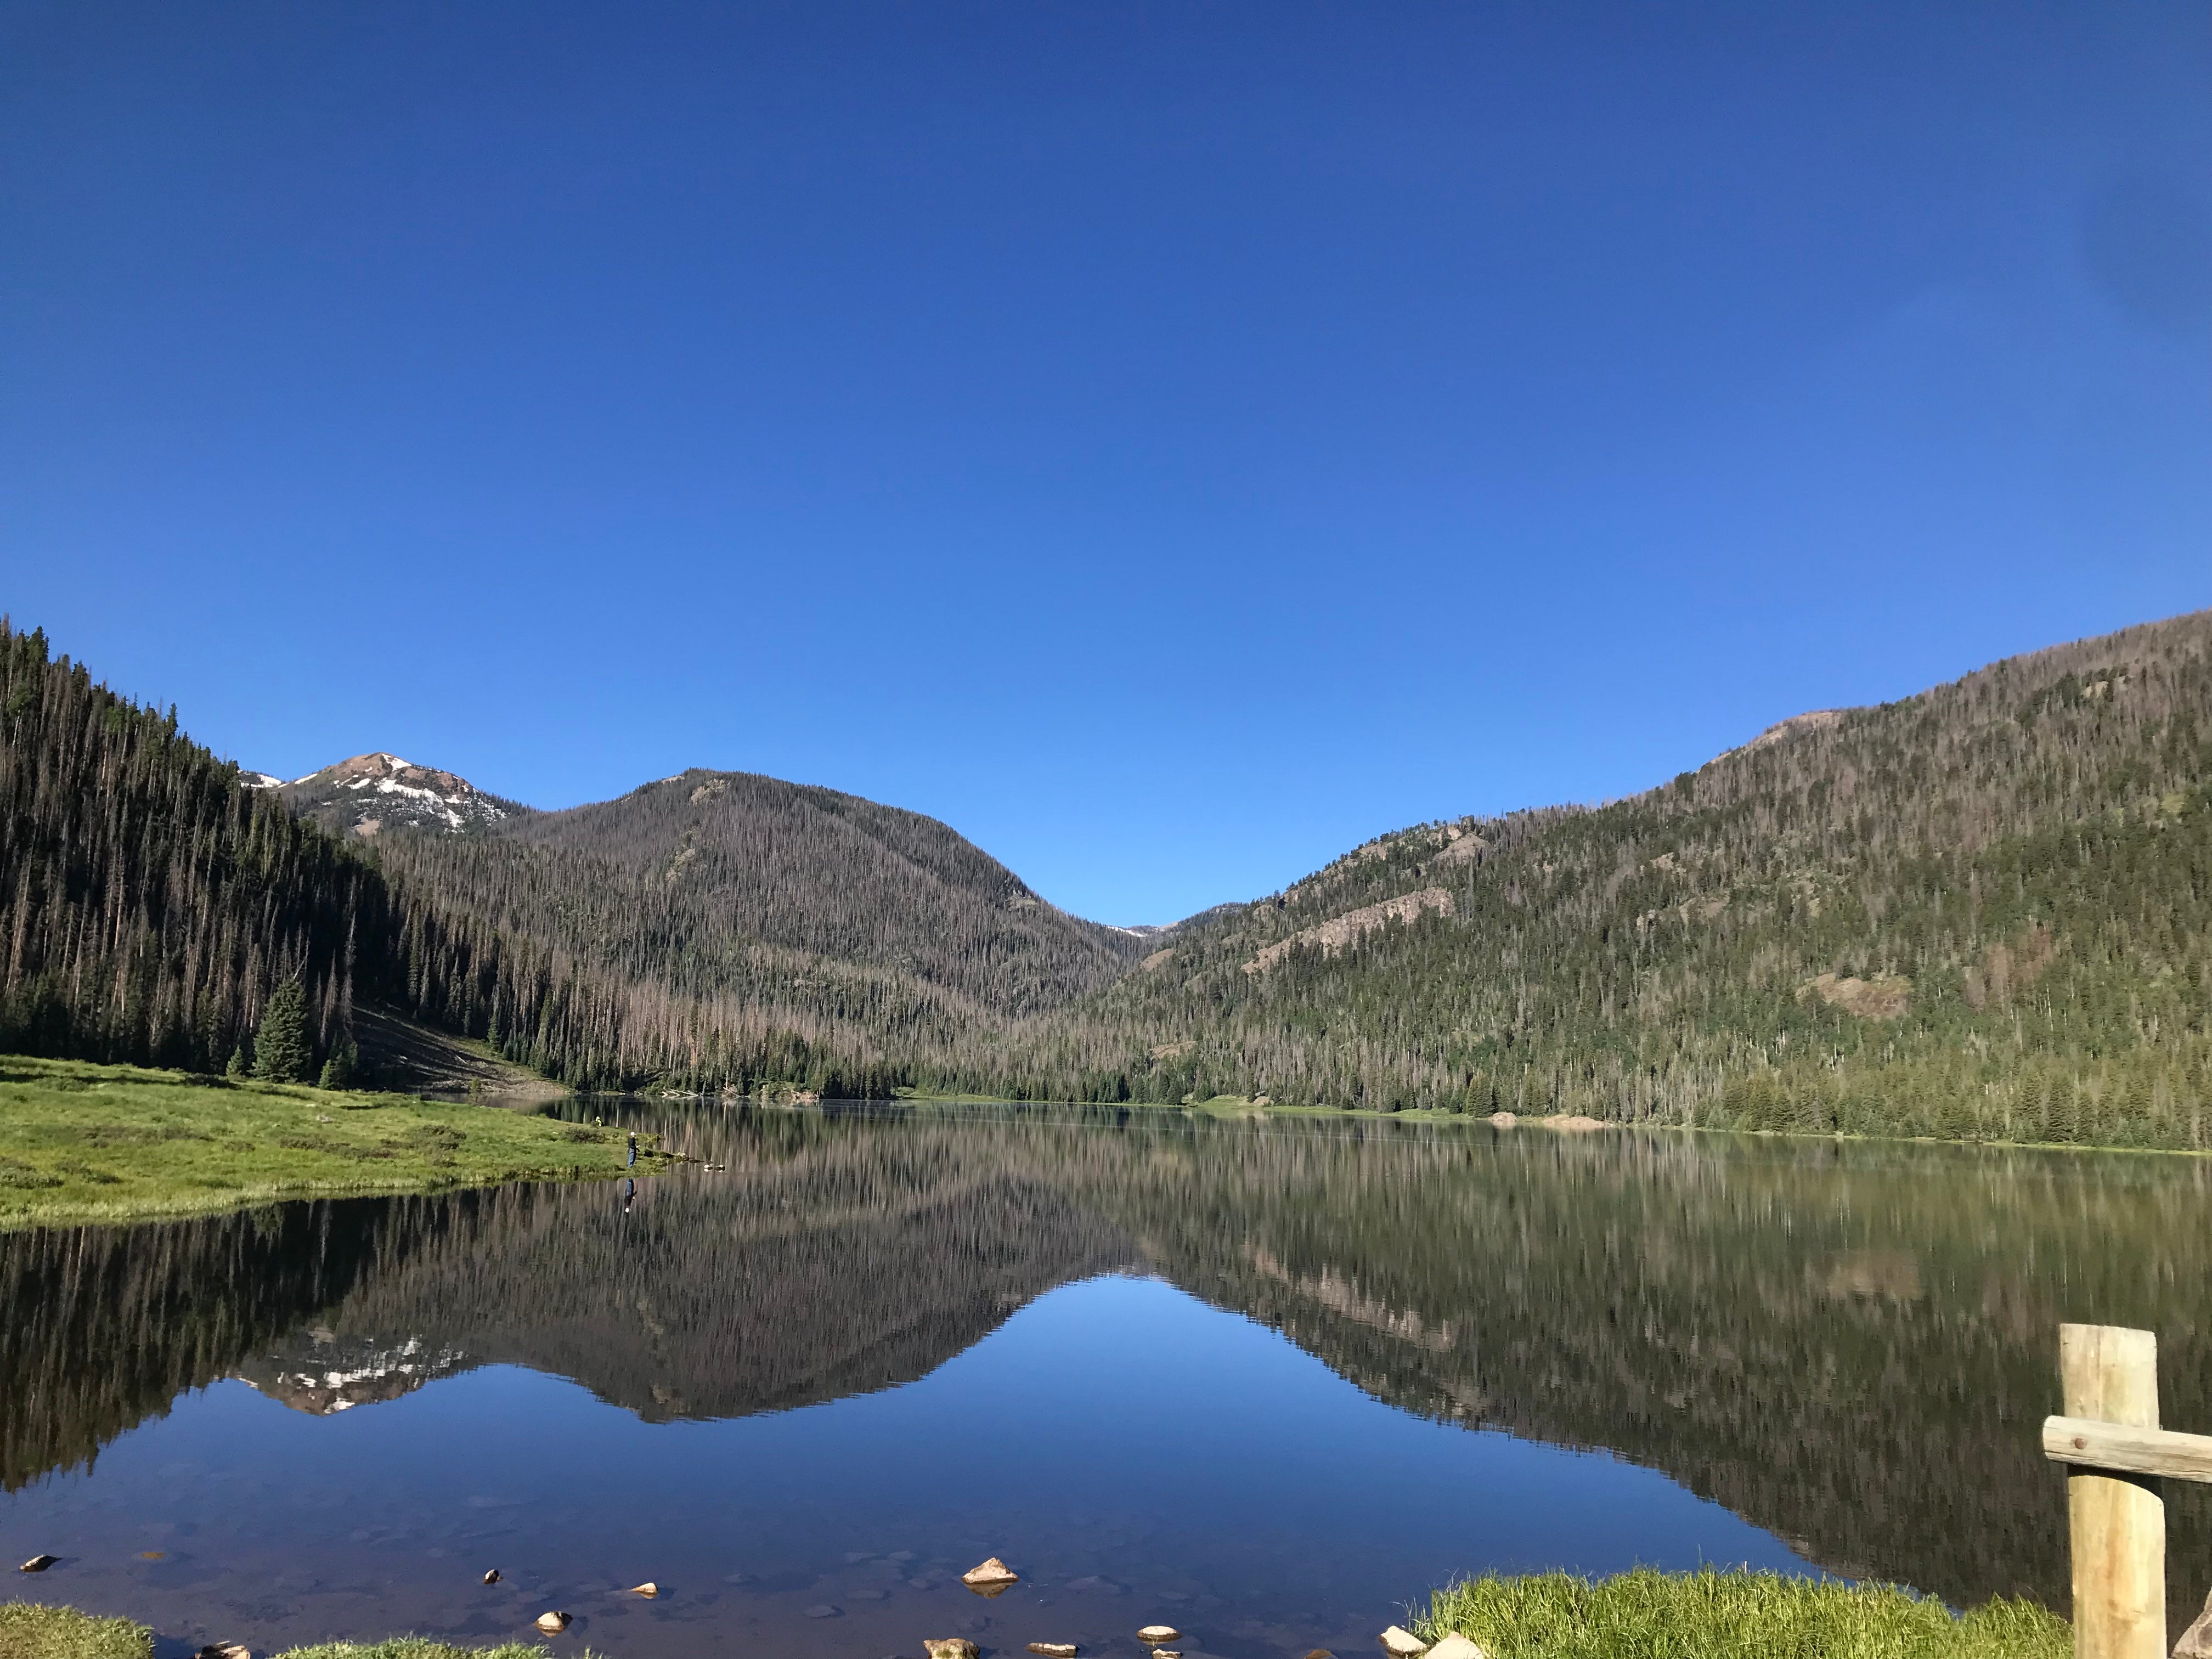 Camper submitted image from Big Meadows Reservoir Campground (south Central Co) - 3